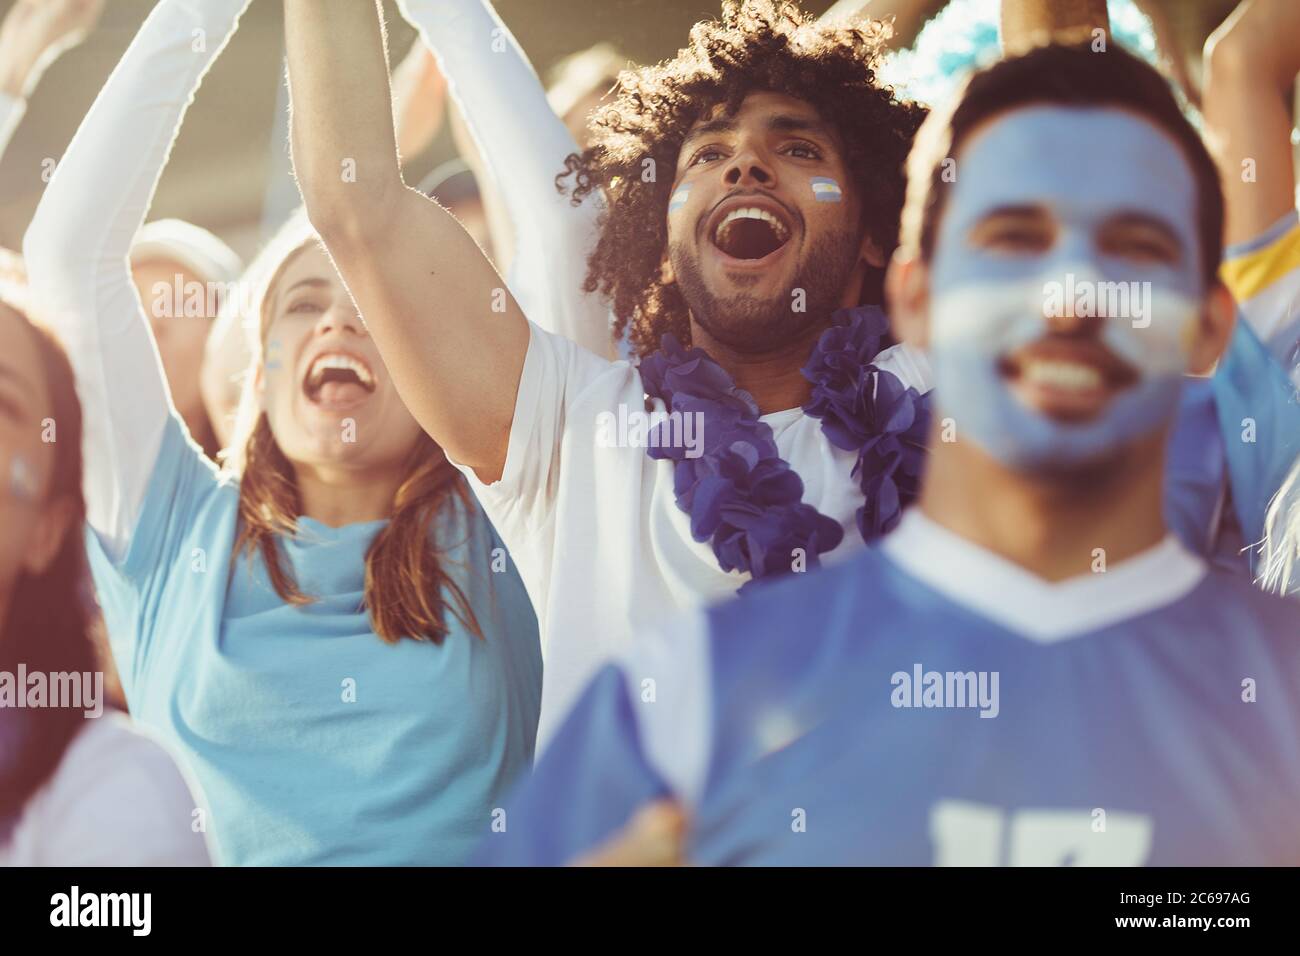 Group of cheering soccer fans from Argentina. Excited sports fans at live football game chanting and cheering for their team. Stock Photo